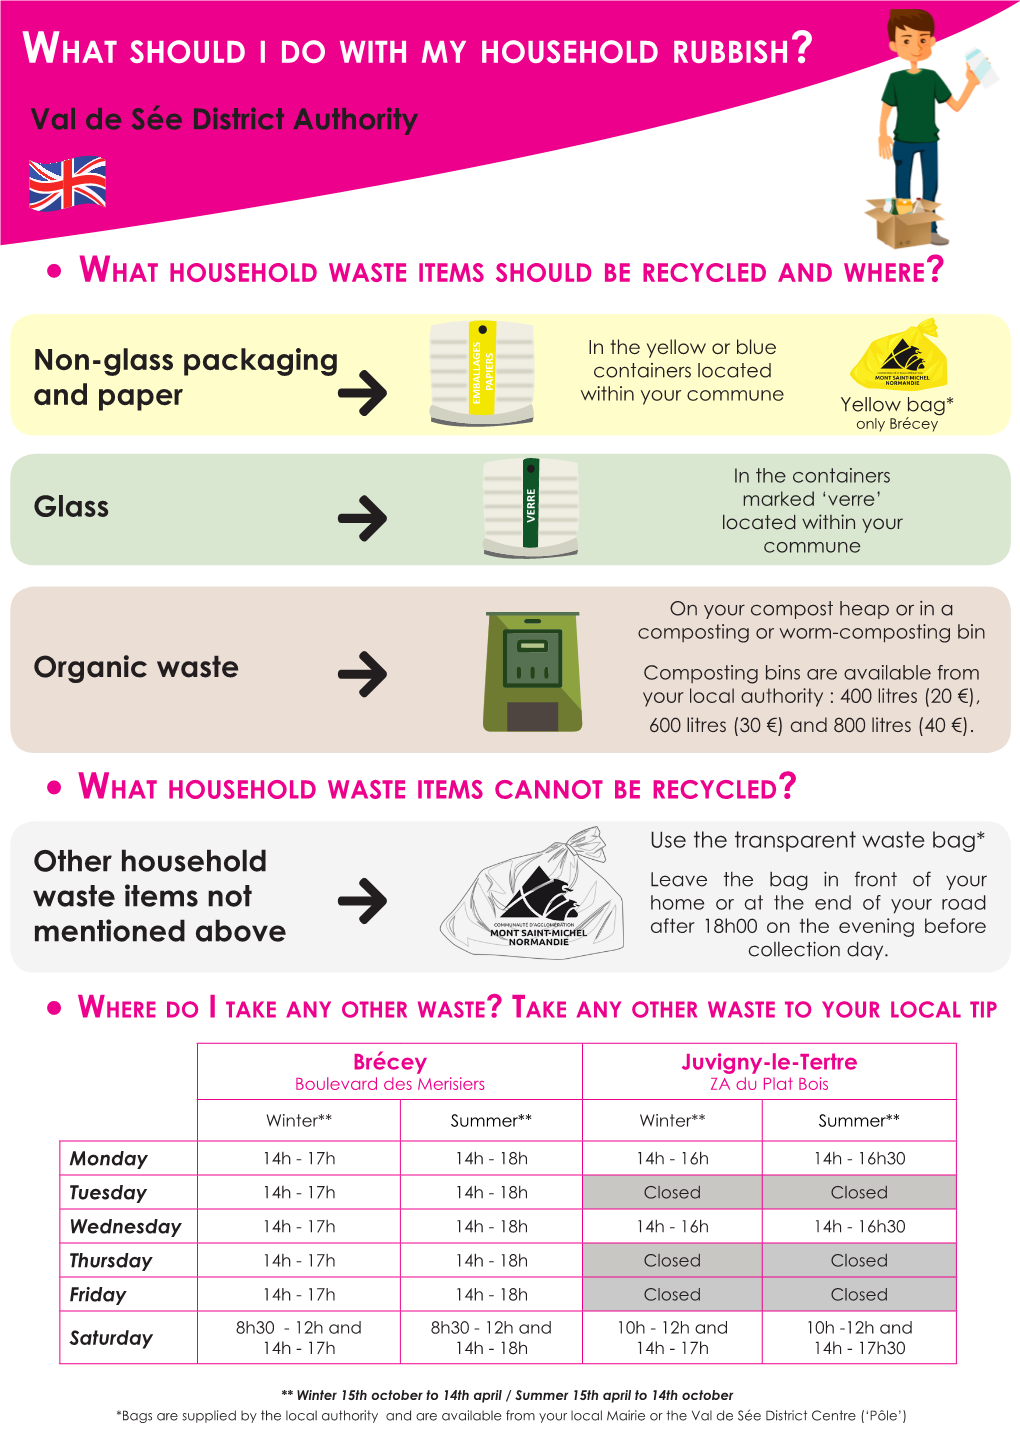 These Waste Items CANNOT BE RECYCLED = Household Rubbish